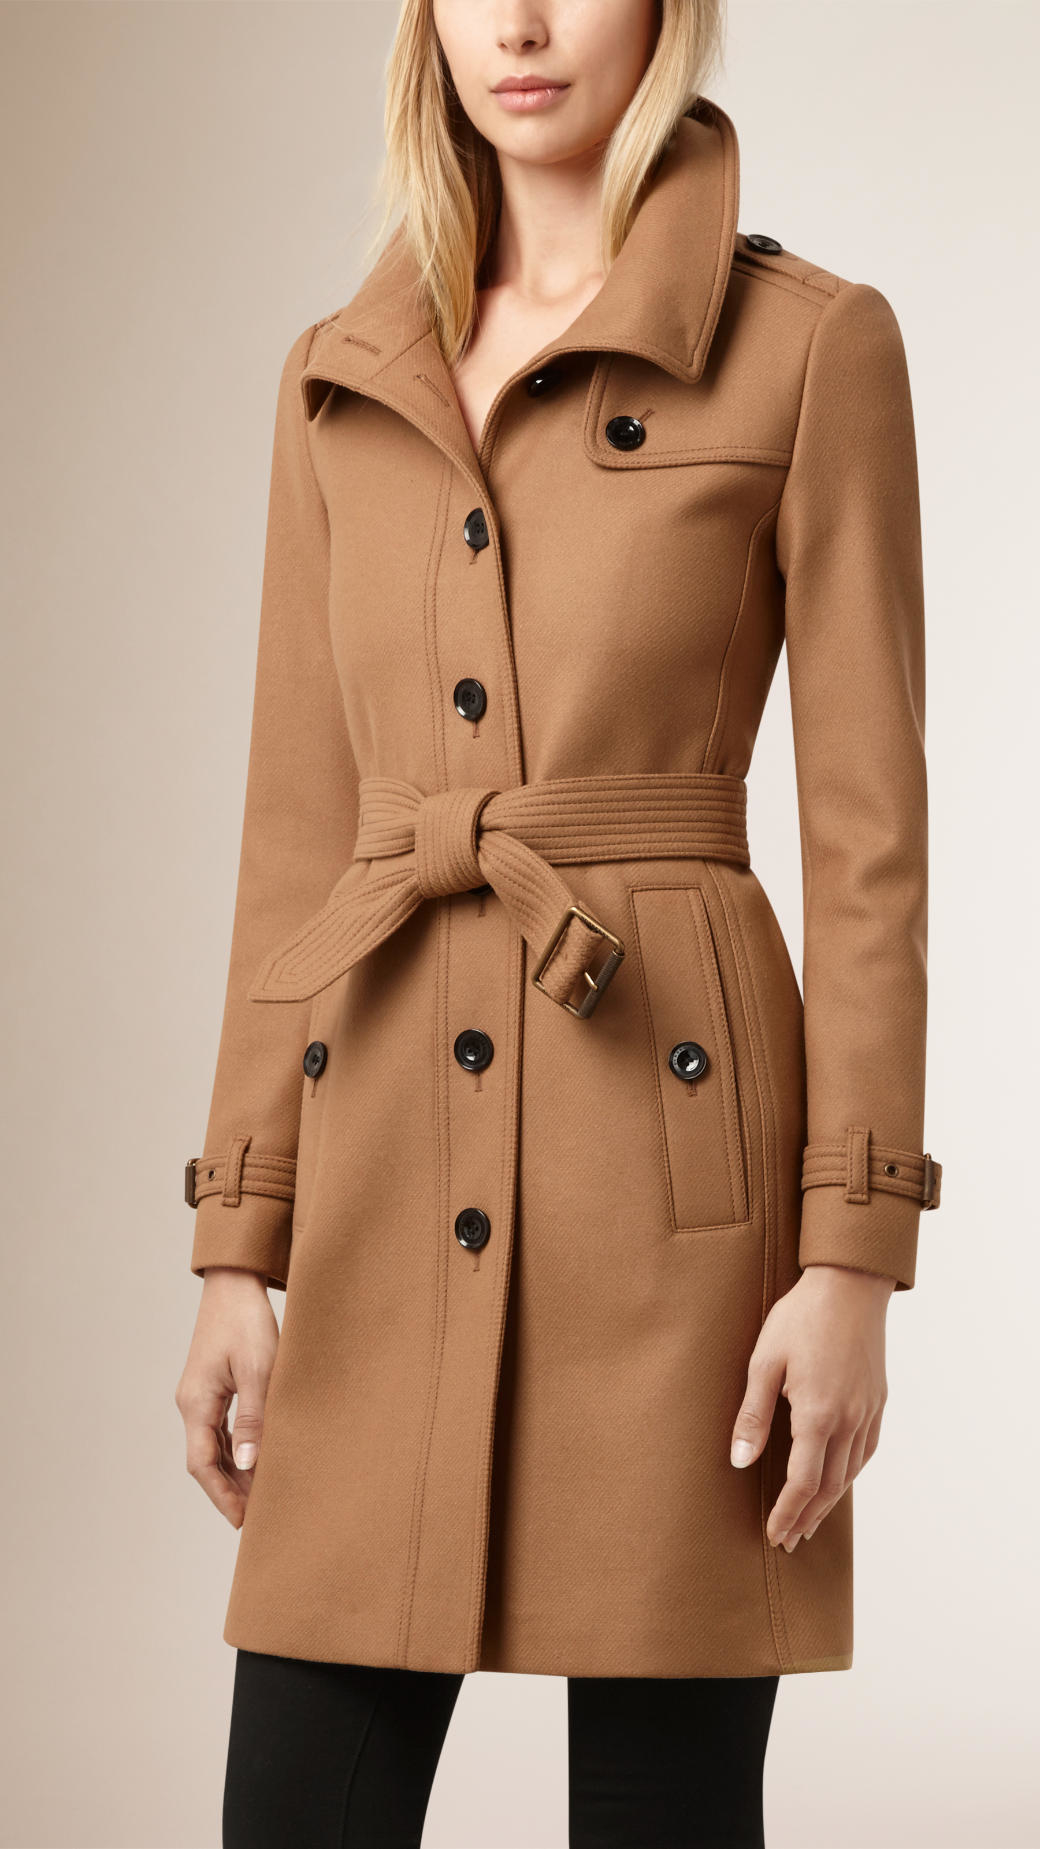 burberry camel wool coat Online Shopping for Women, Men, Kids Fashion &  Lifestyle|Free Delivery & Returns! -